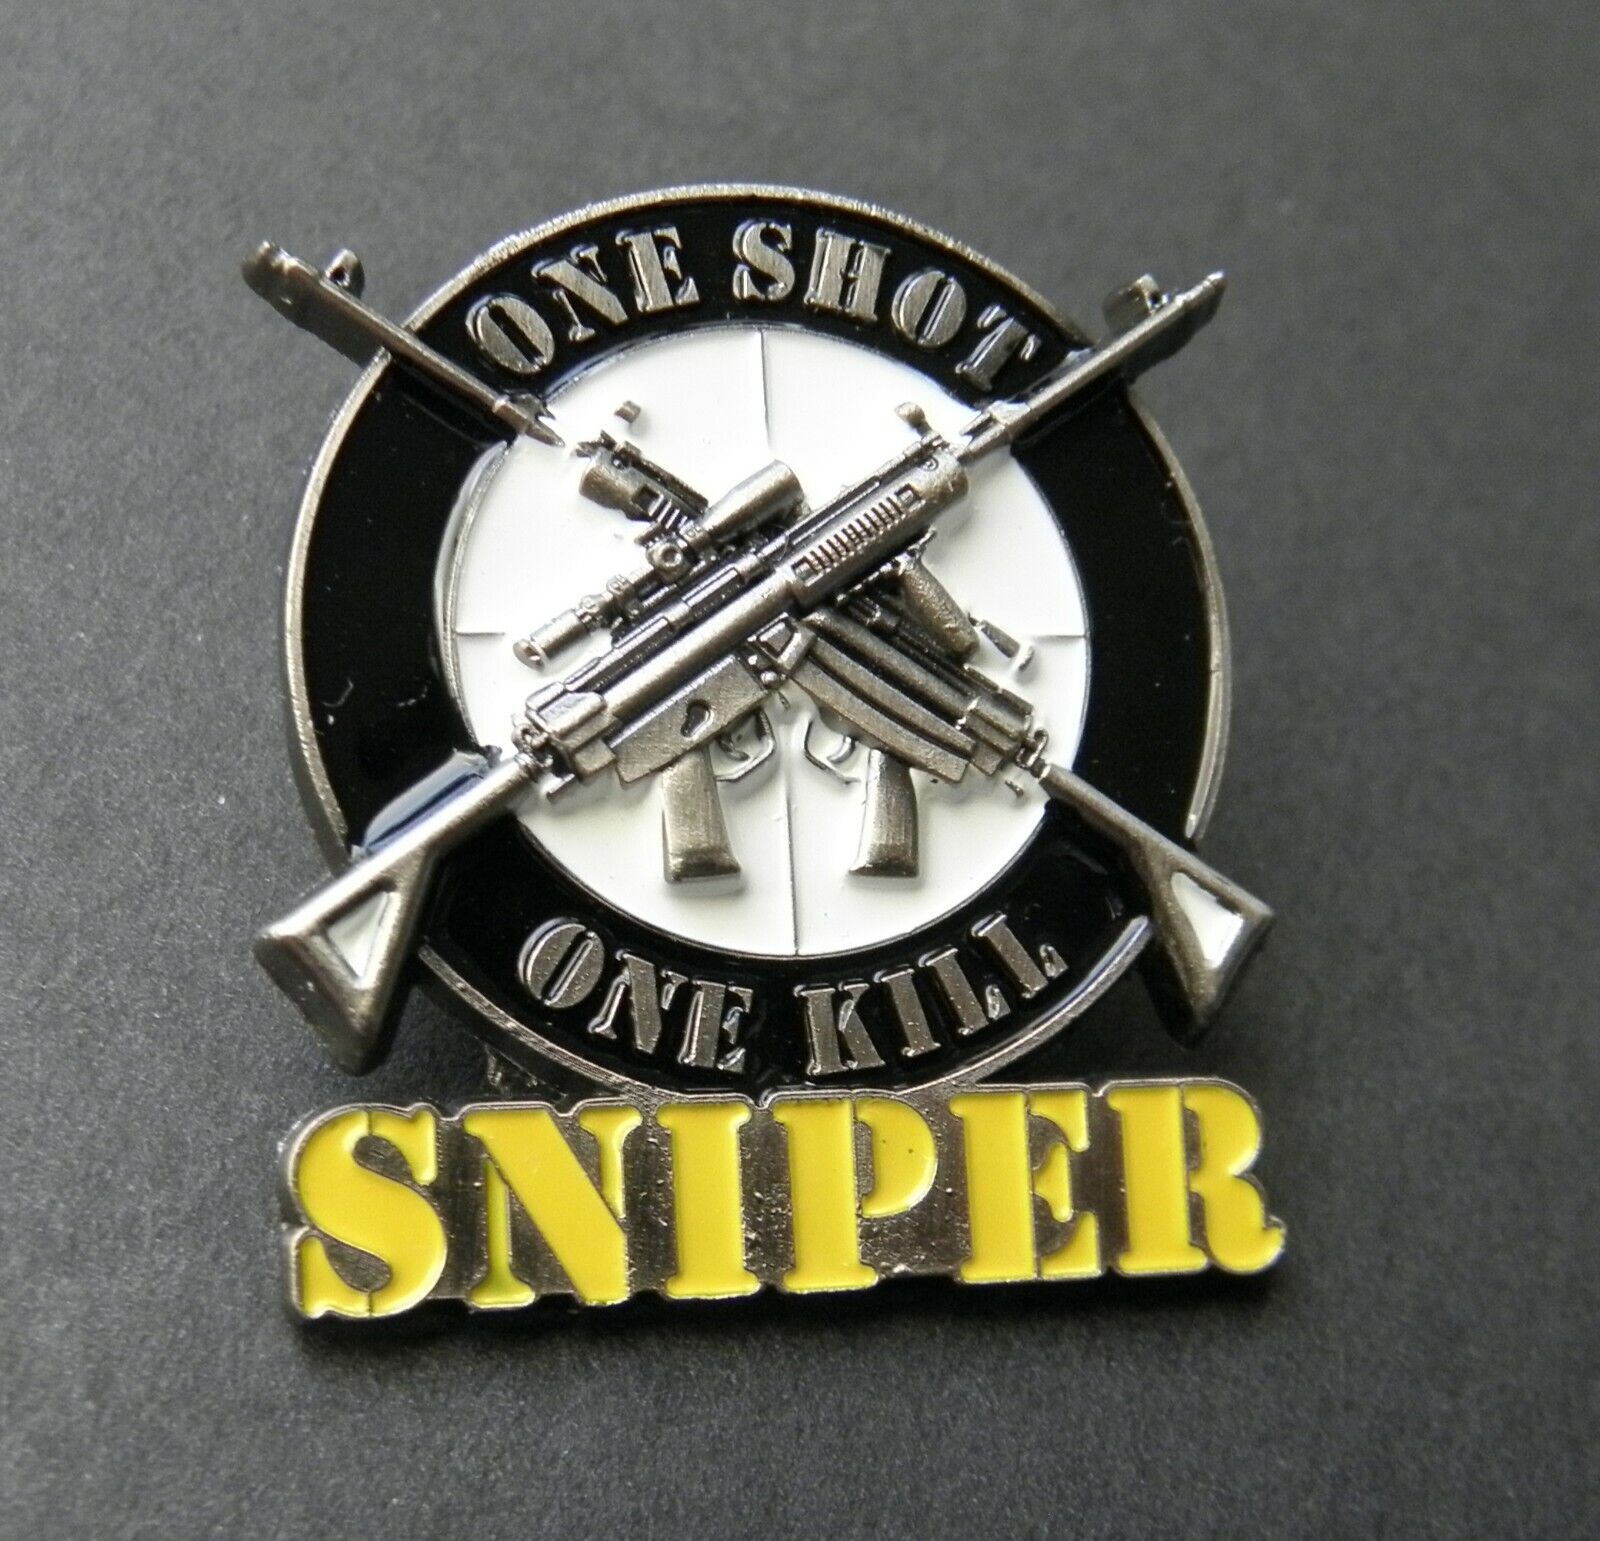 SPECIAL FORCES SNIPER ONE SHOT ONE KILL LAPEL HAT PIN BADGE 1.1 INCHES